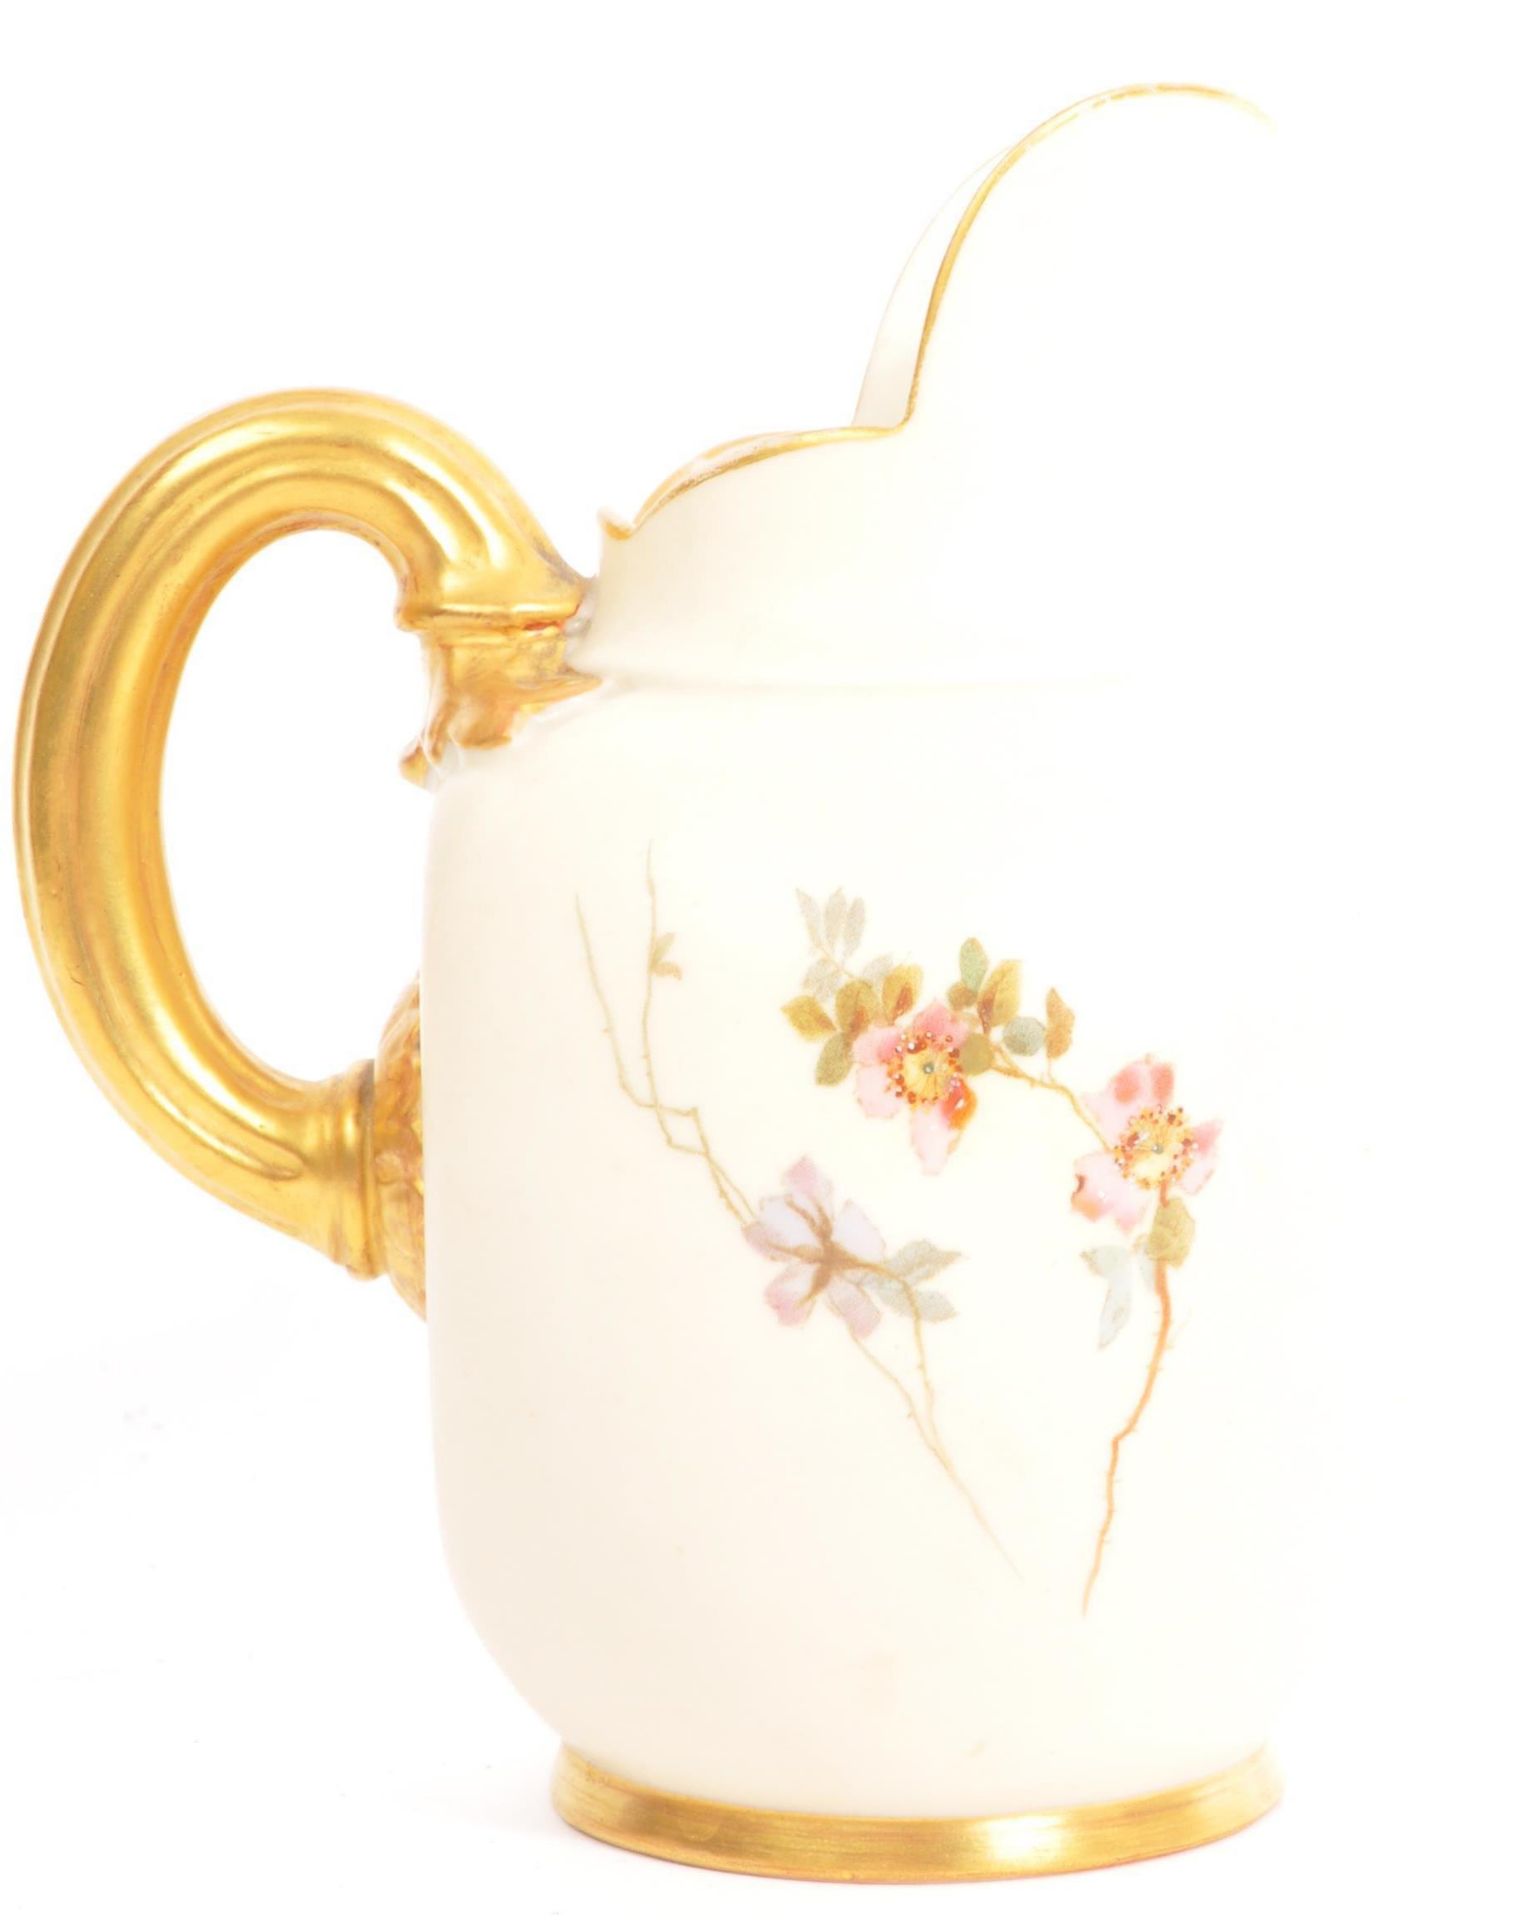 19TH CENTURY ROYAL WORCESTER HAND PAINTED JUG - Image 3 of 7